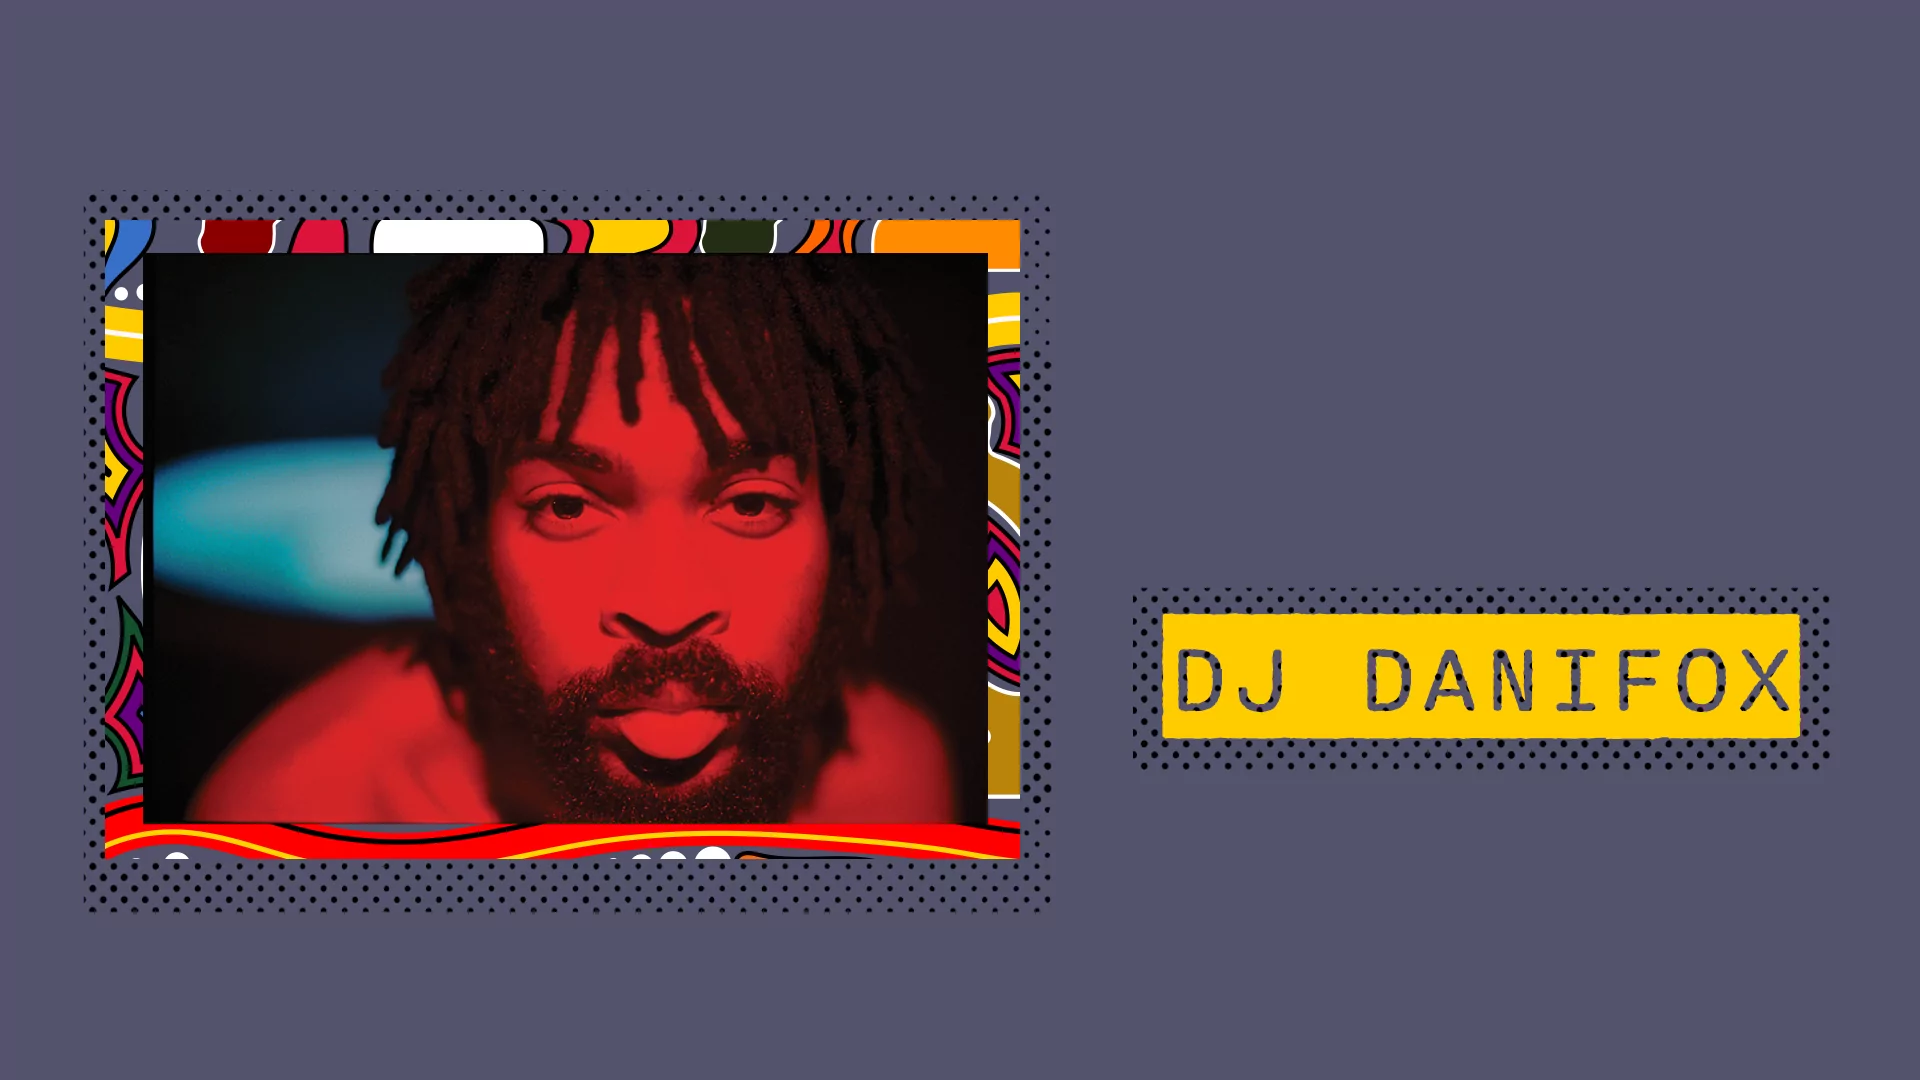 Purple collage featuring an image of DJ Danifox and his name in yellow block font